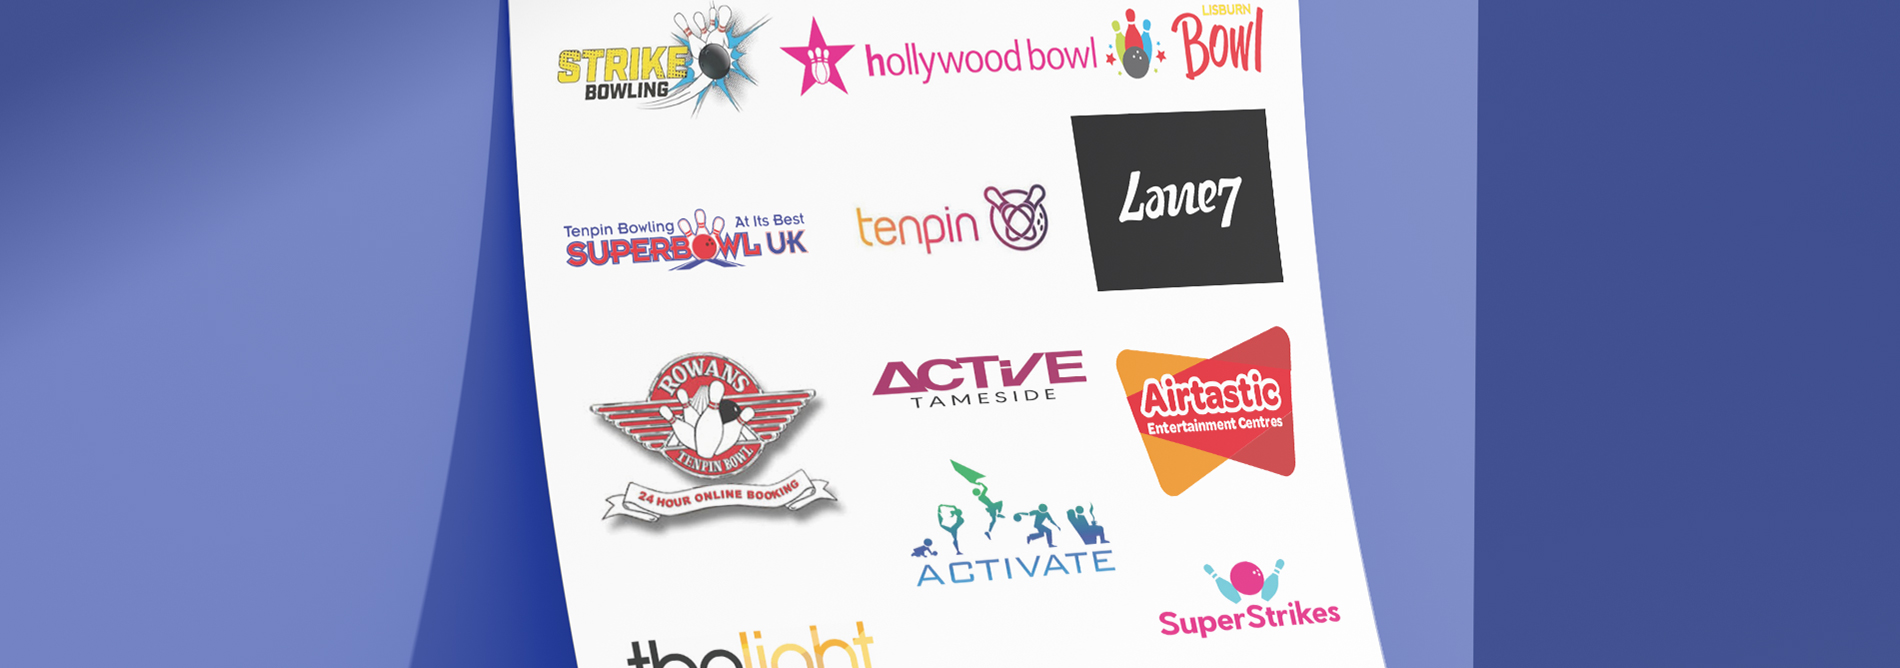 Bowling-QubicaAMF-centre-references-UK-banner